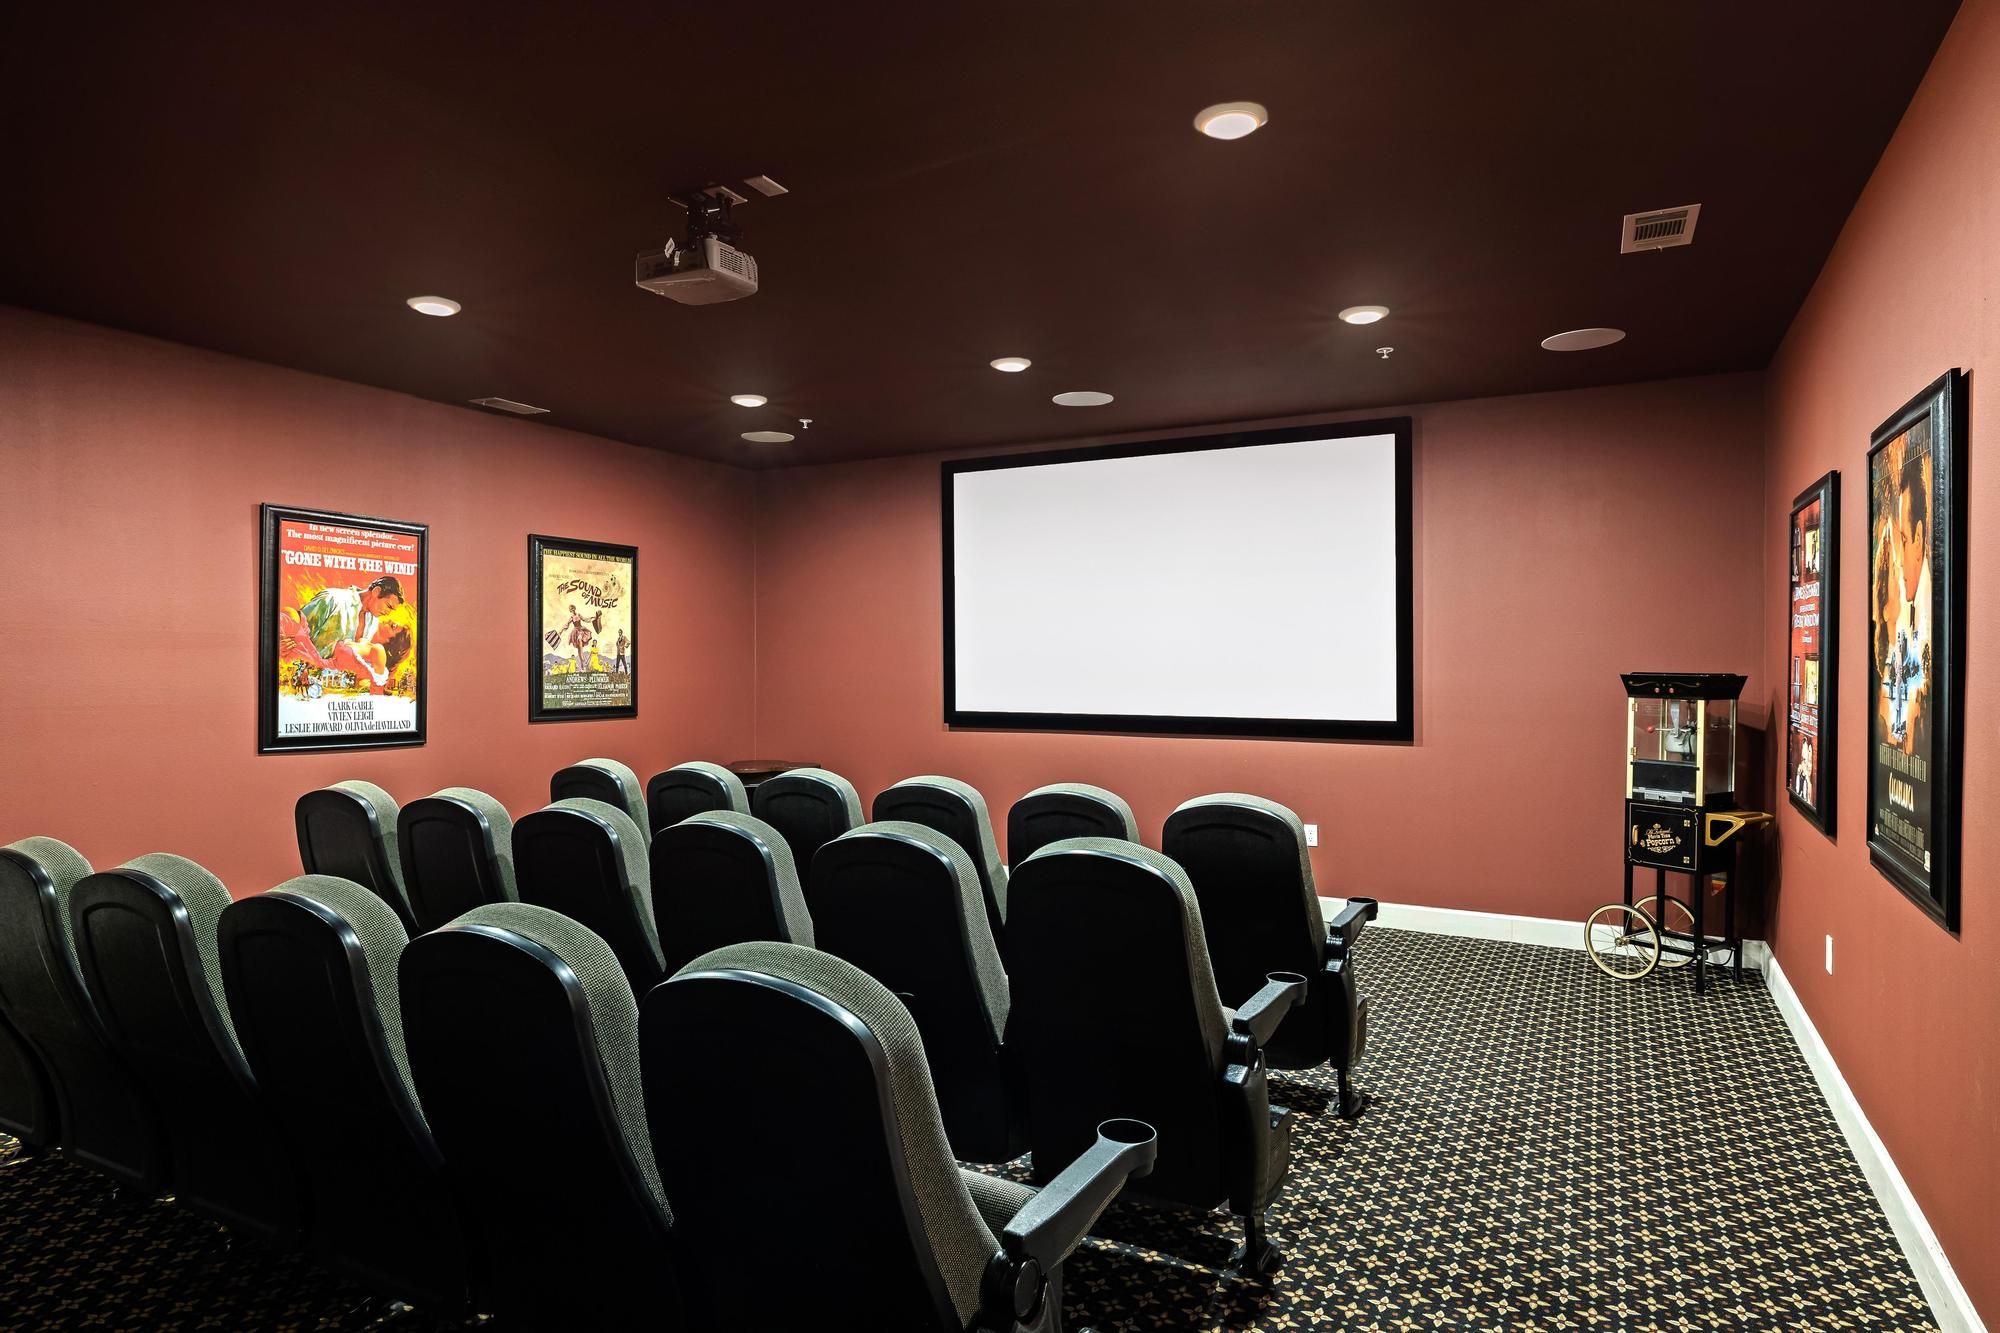 The Claiborne at Hattiesburg movie theater with comfortable seating and surround sound